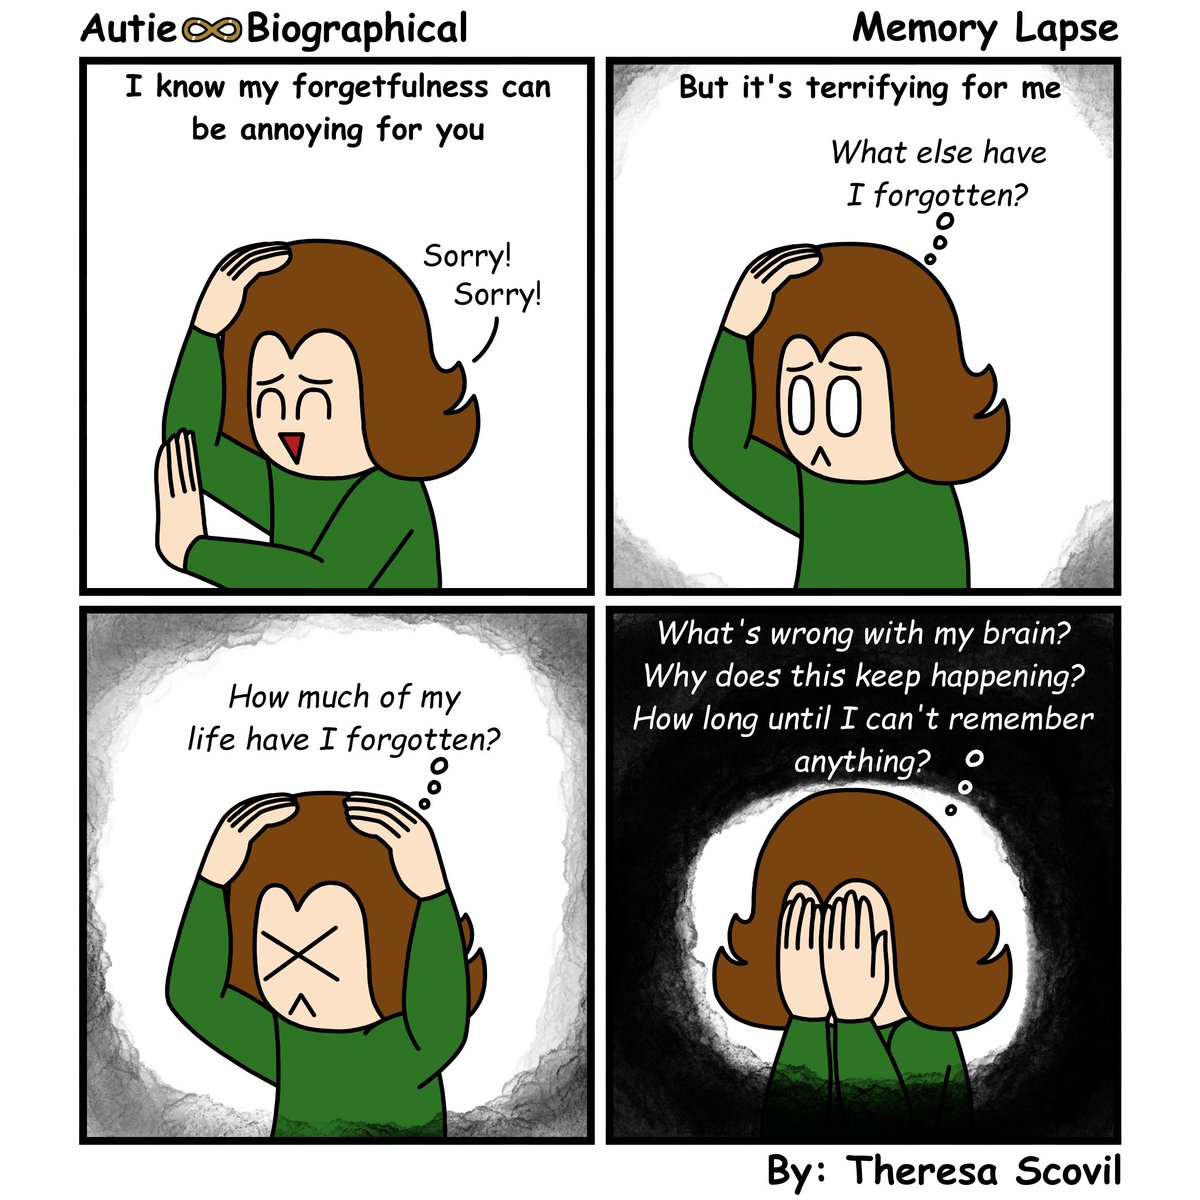 Things like depression, anxiety, and a whole host of other things can really mess with a person's memory. #AutieBiographical #MemoryIssues